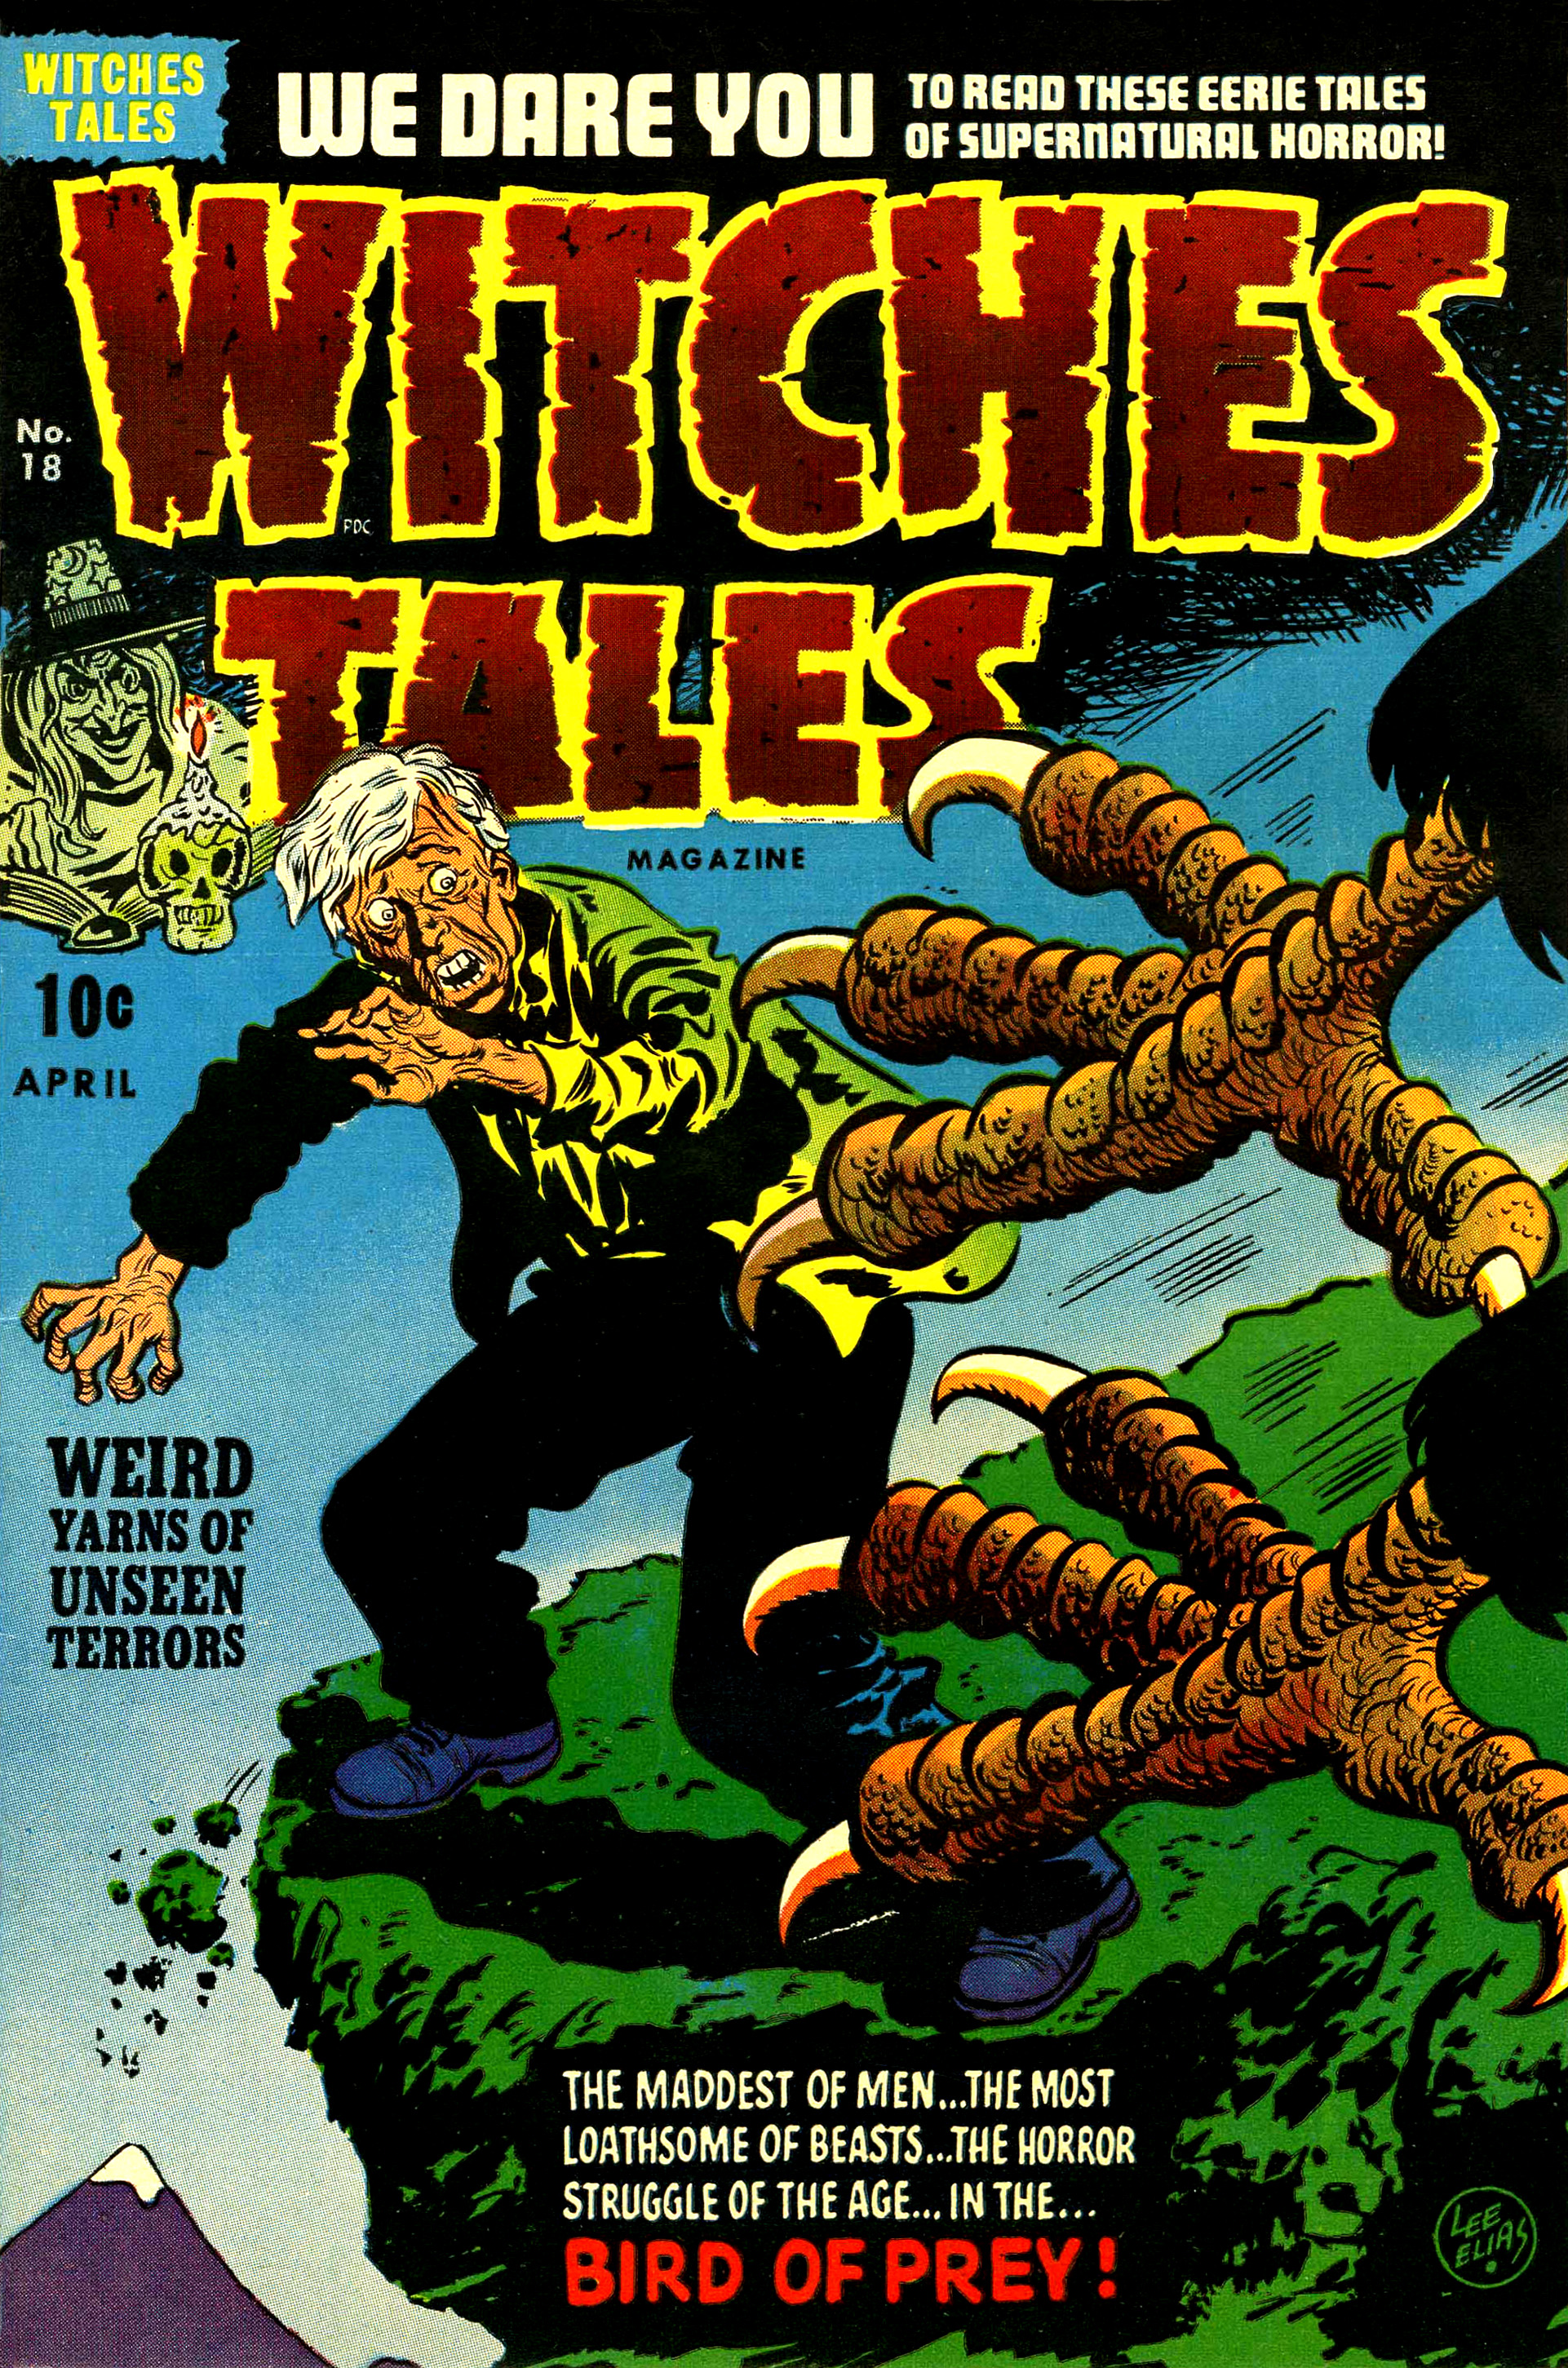 Witches Tales #18, Lee Elias Cover (Harvey, 1953)